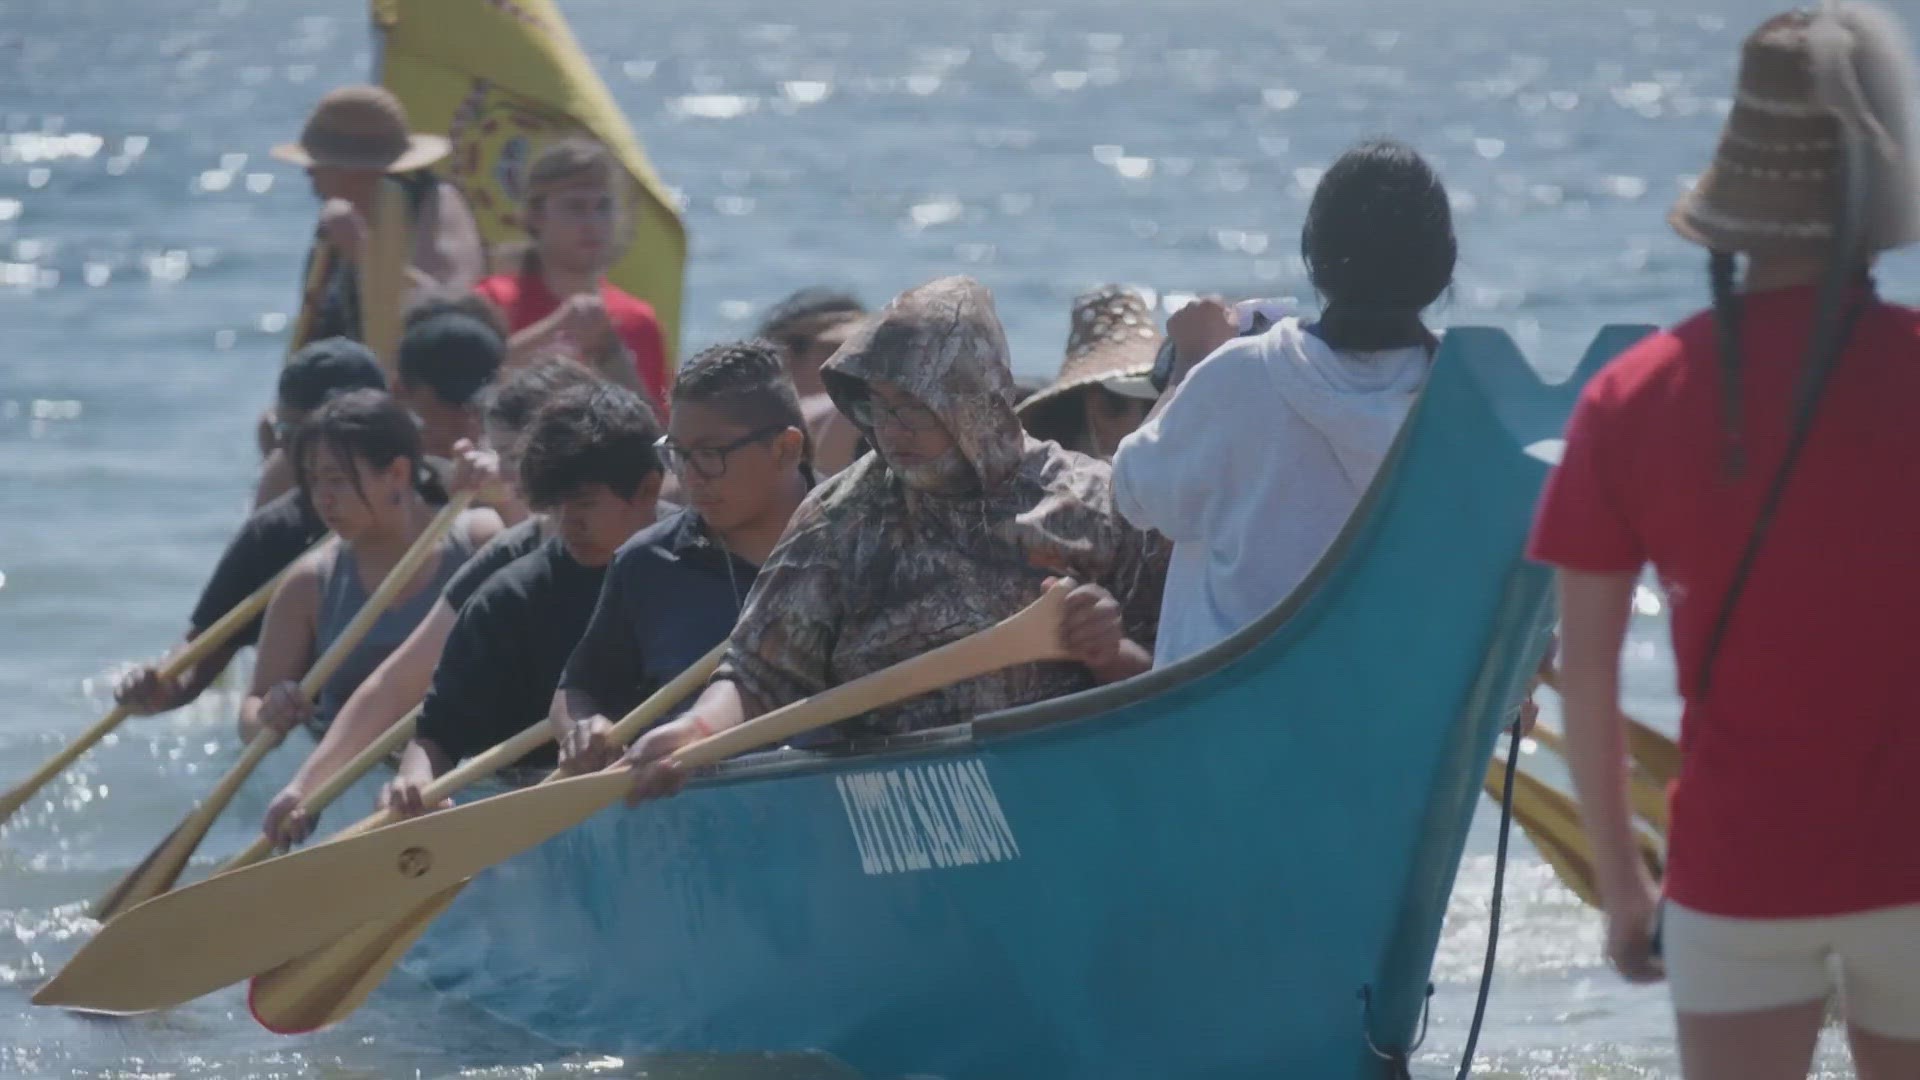 About 100 canoes are expected for a journey that will end in Seattle's Alki Beach on Sunday.